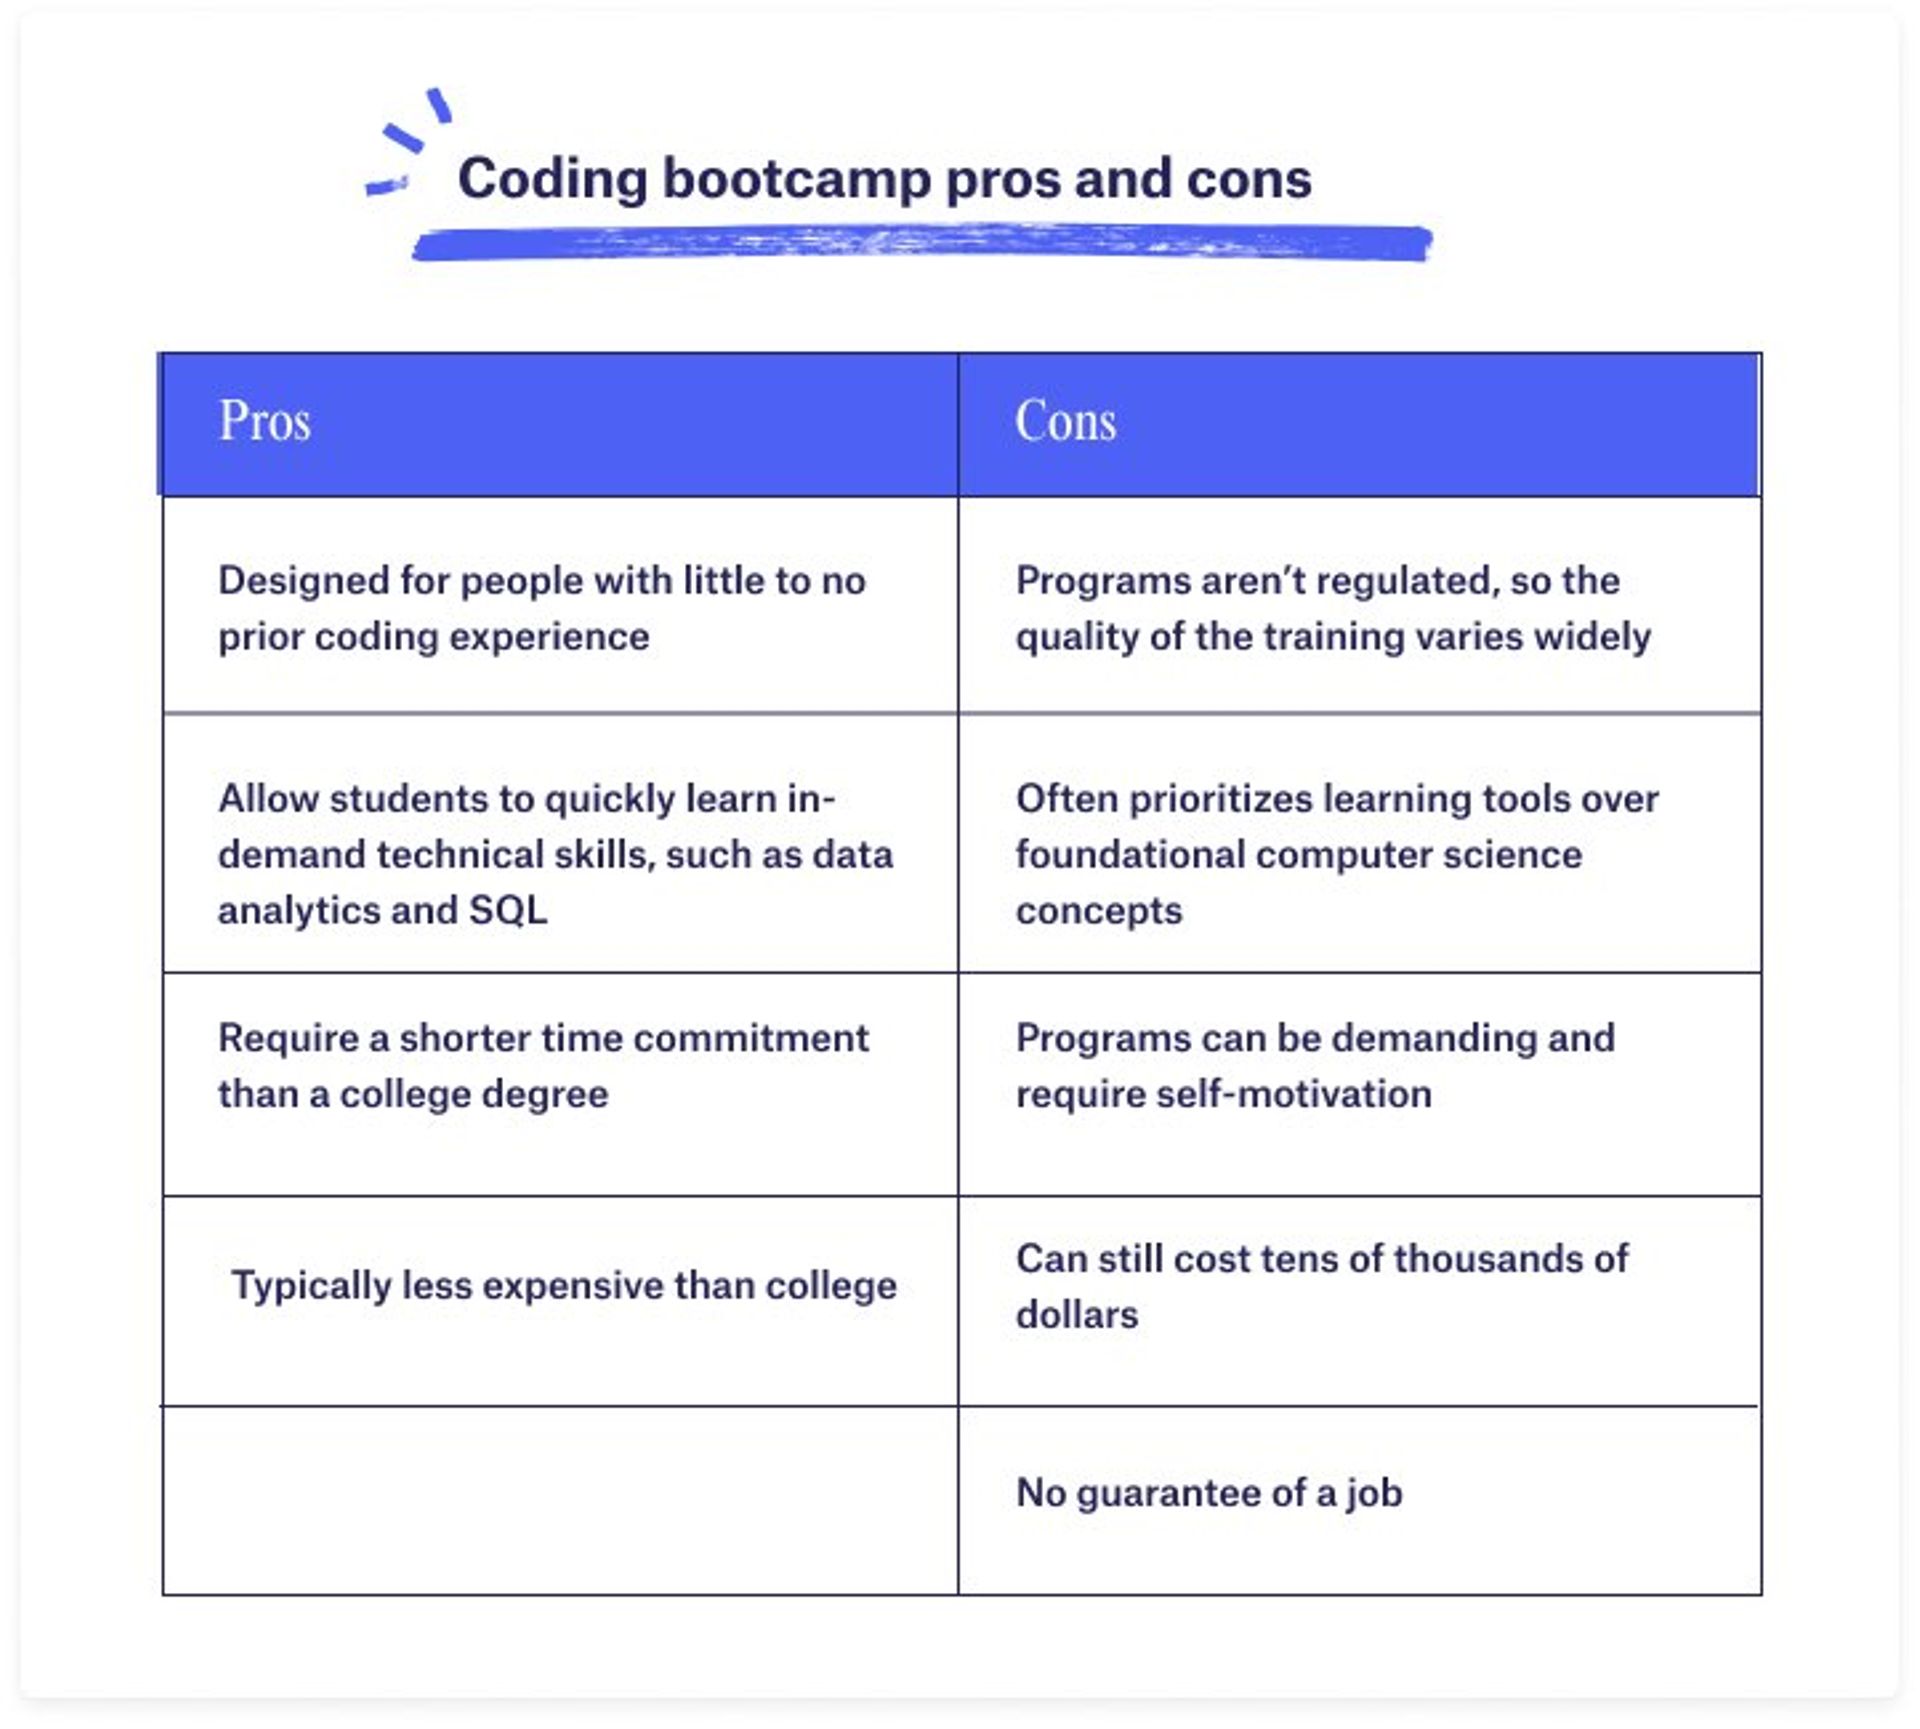 pros and cons of coding bootcamps